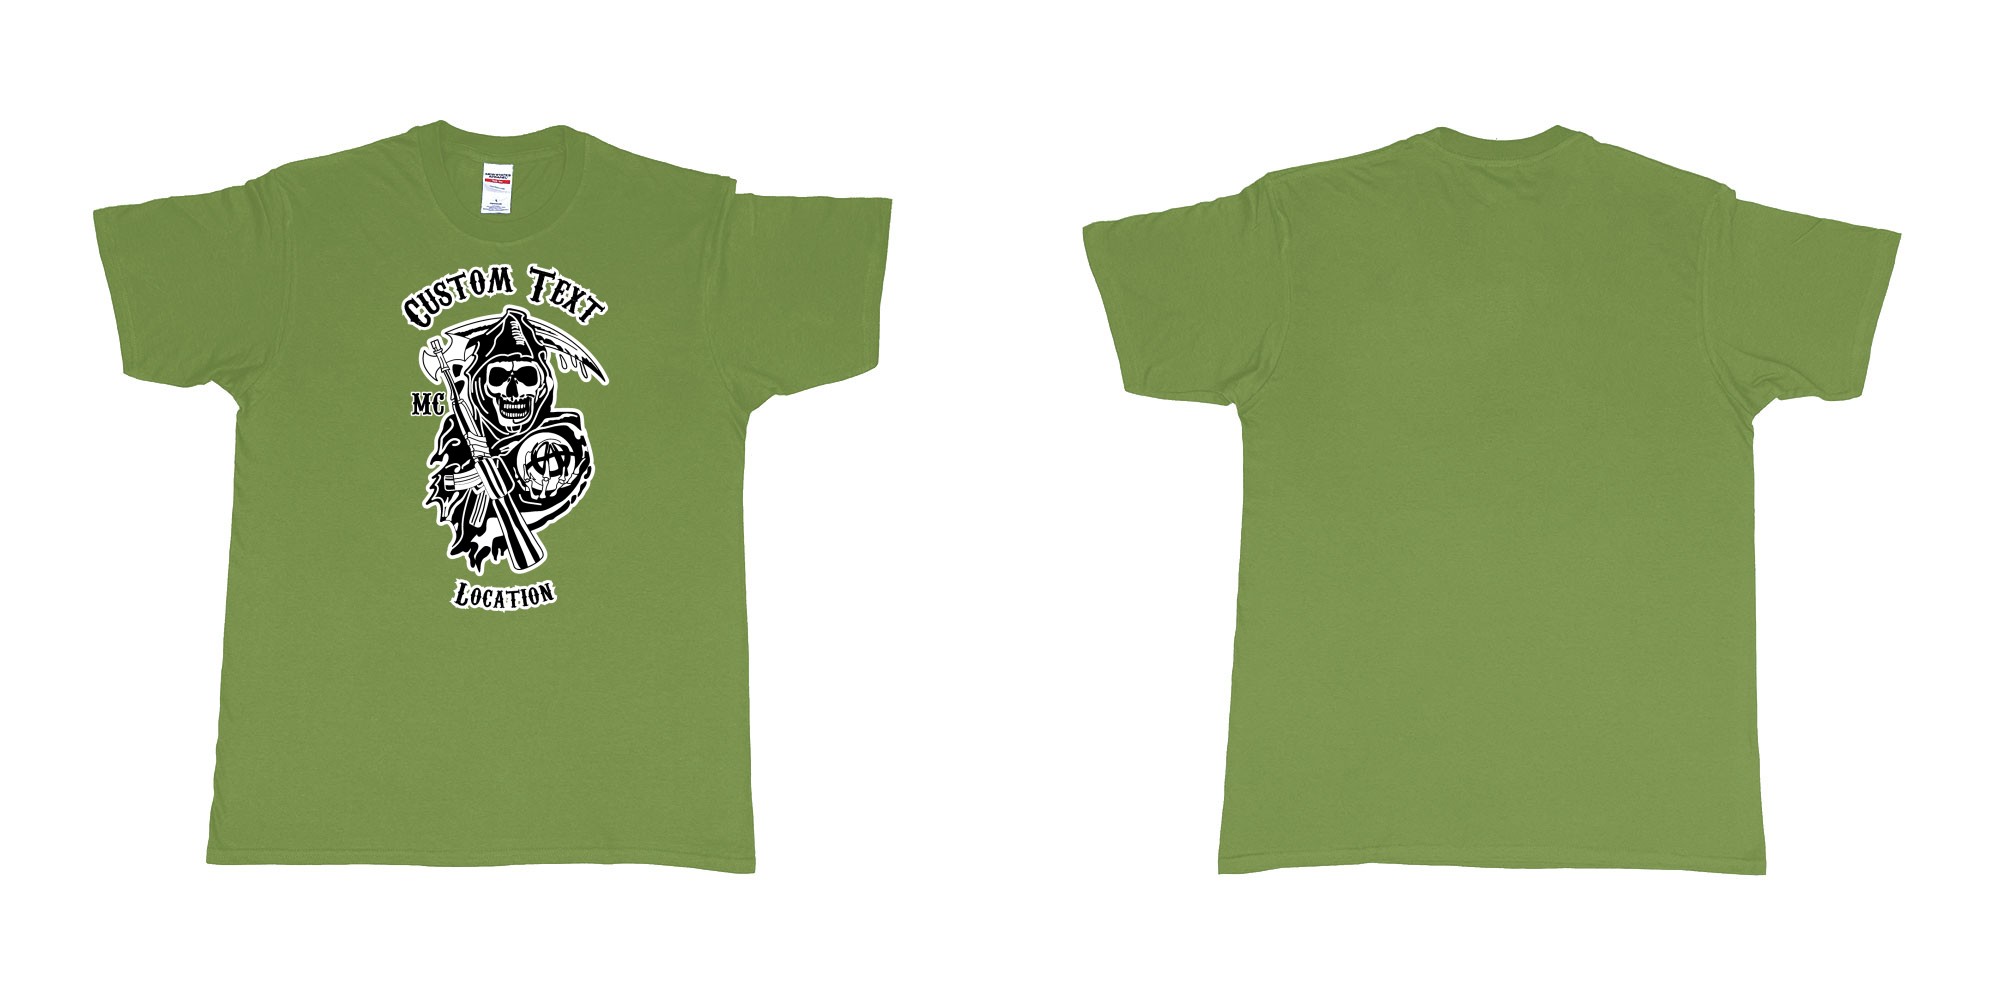 Custom tshirt design son of anarchy logo custom text in fabric color military-green choice your own text made in Bali by The Pirate Way